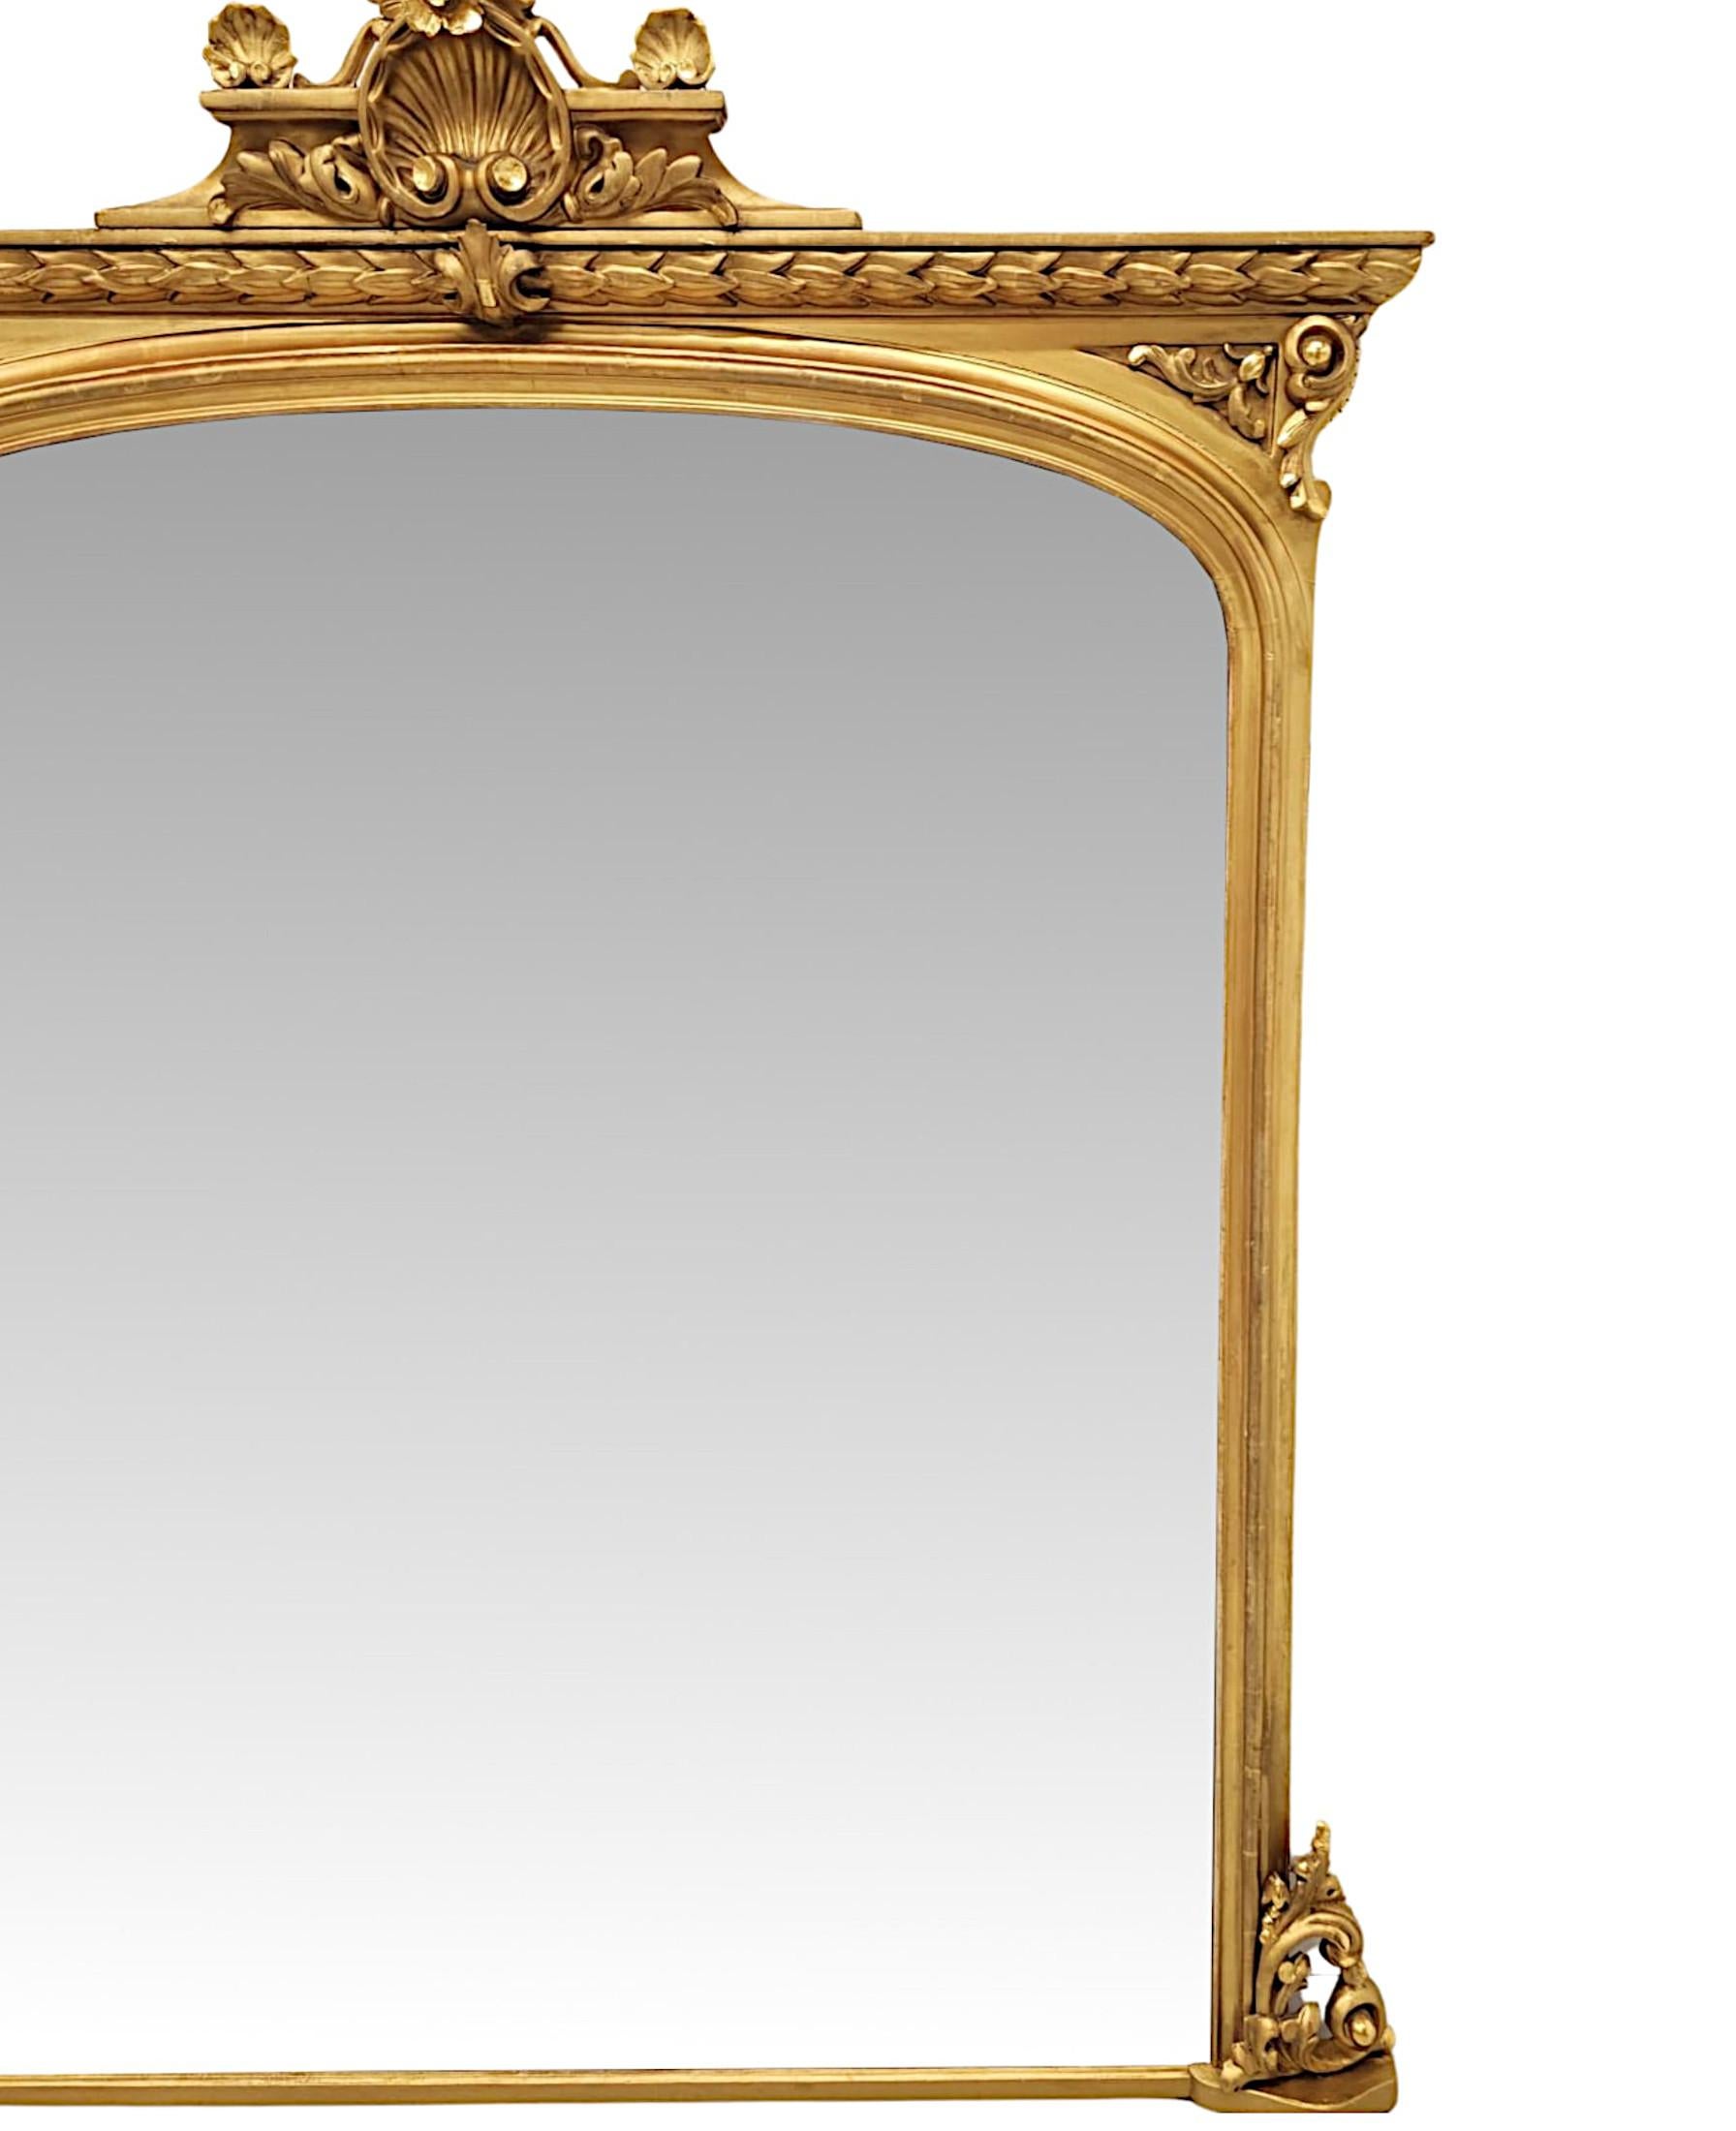 English  A Fabulous Large 19th Century Giltwood Overmantel Mirror For Sale